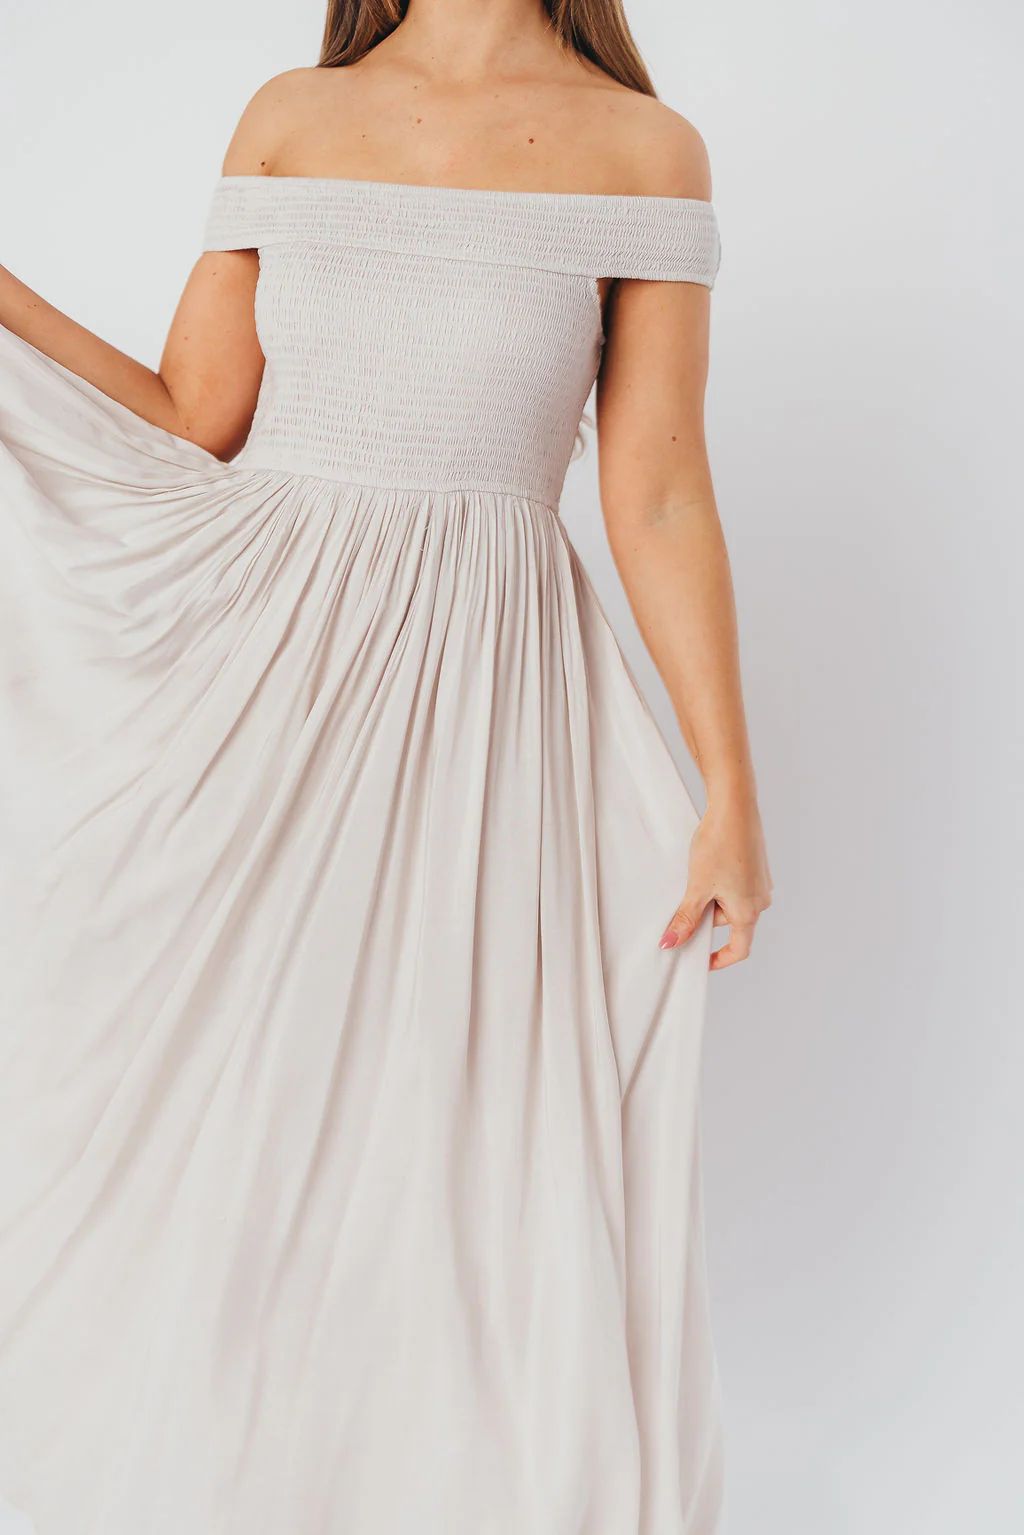 Tatiana Modal Off-the-Shoulder Maxi Dress in Porcelain | Worth Collective